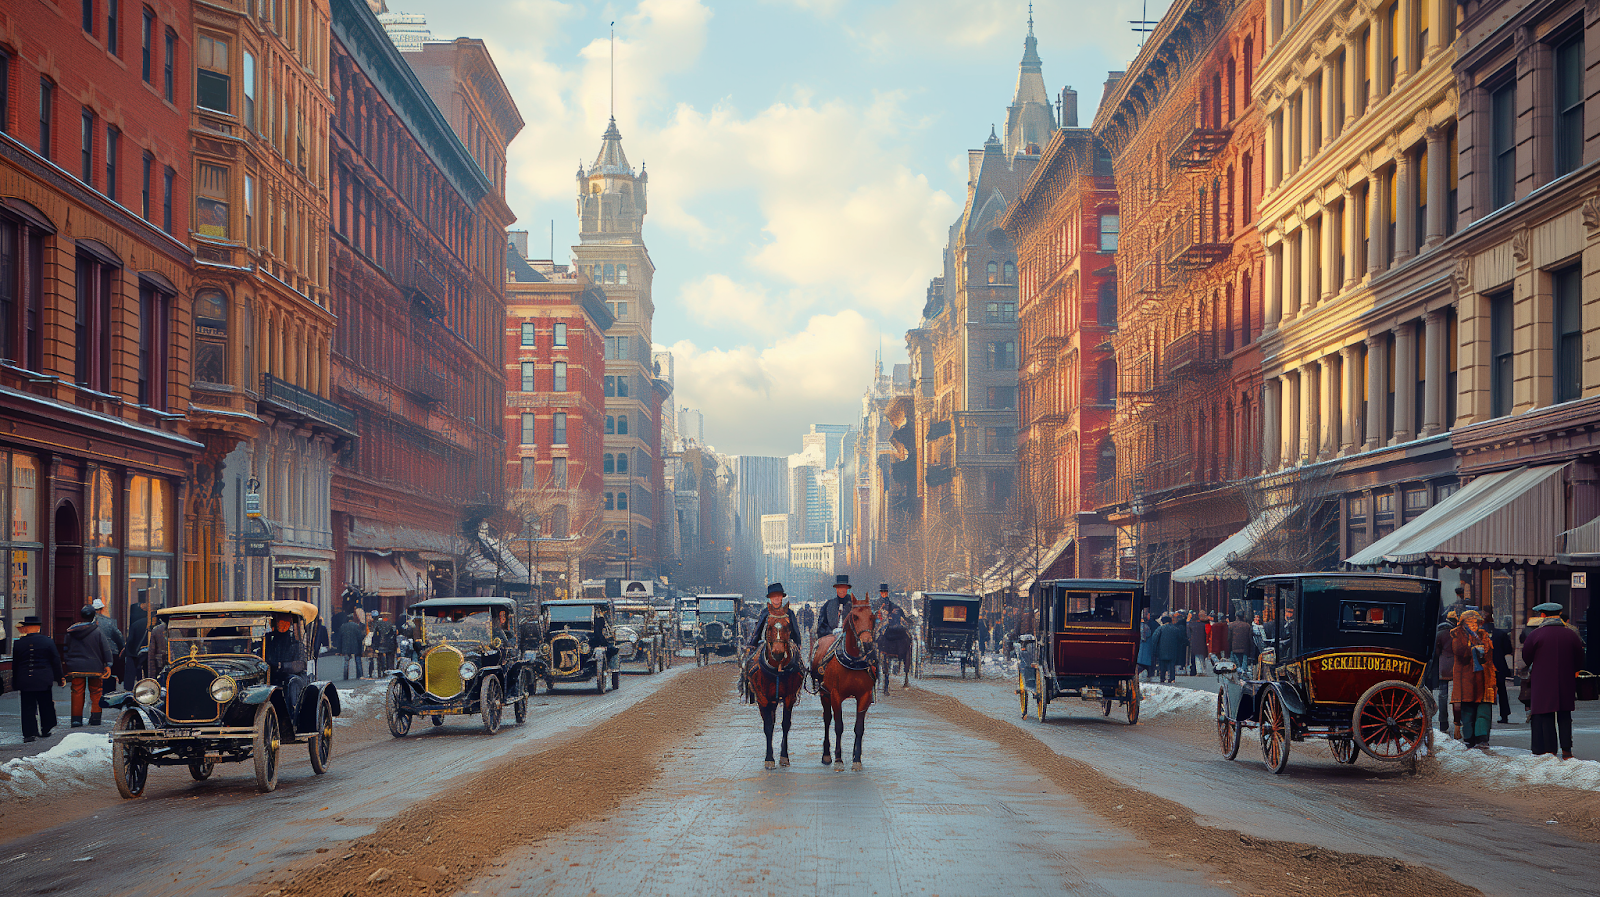 New York City street in the early 1800s, lined with horse-drawn carriages and historic buildings